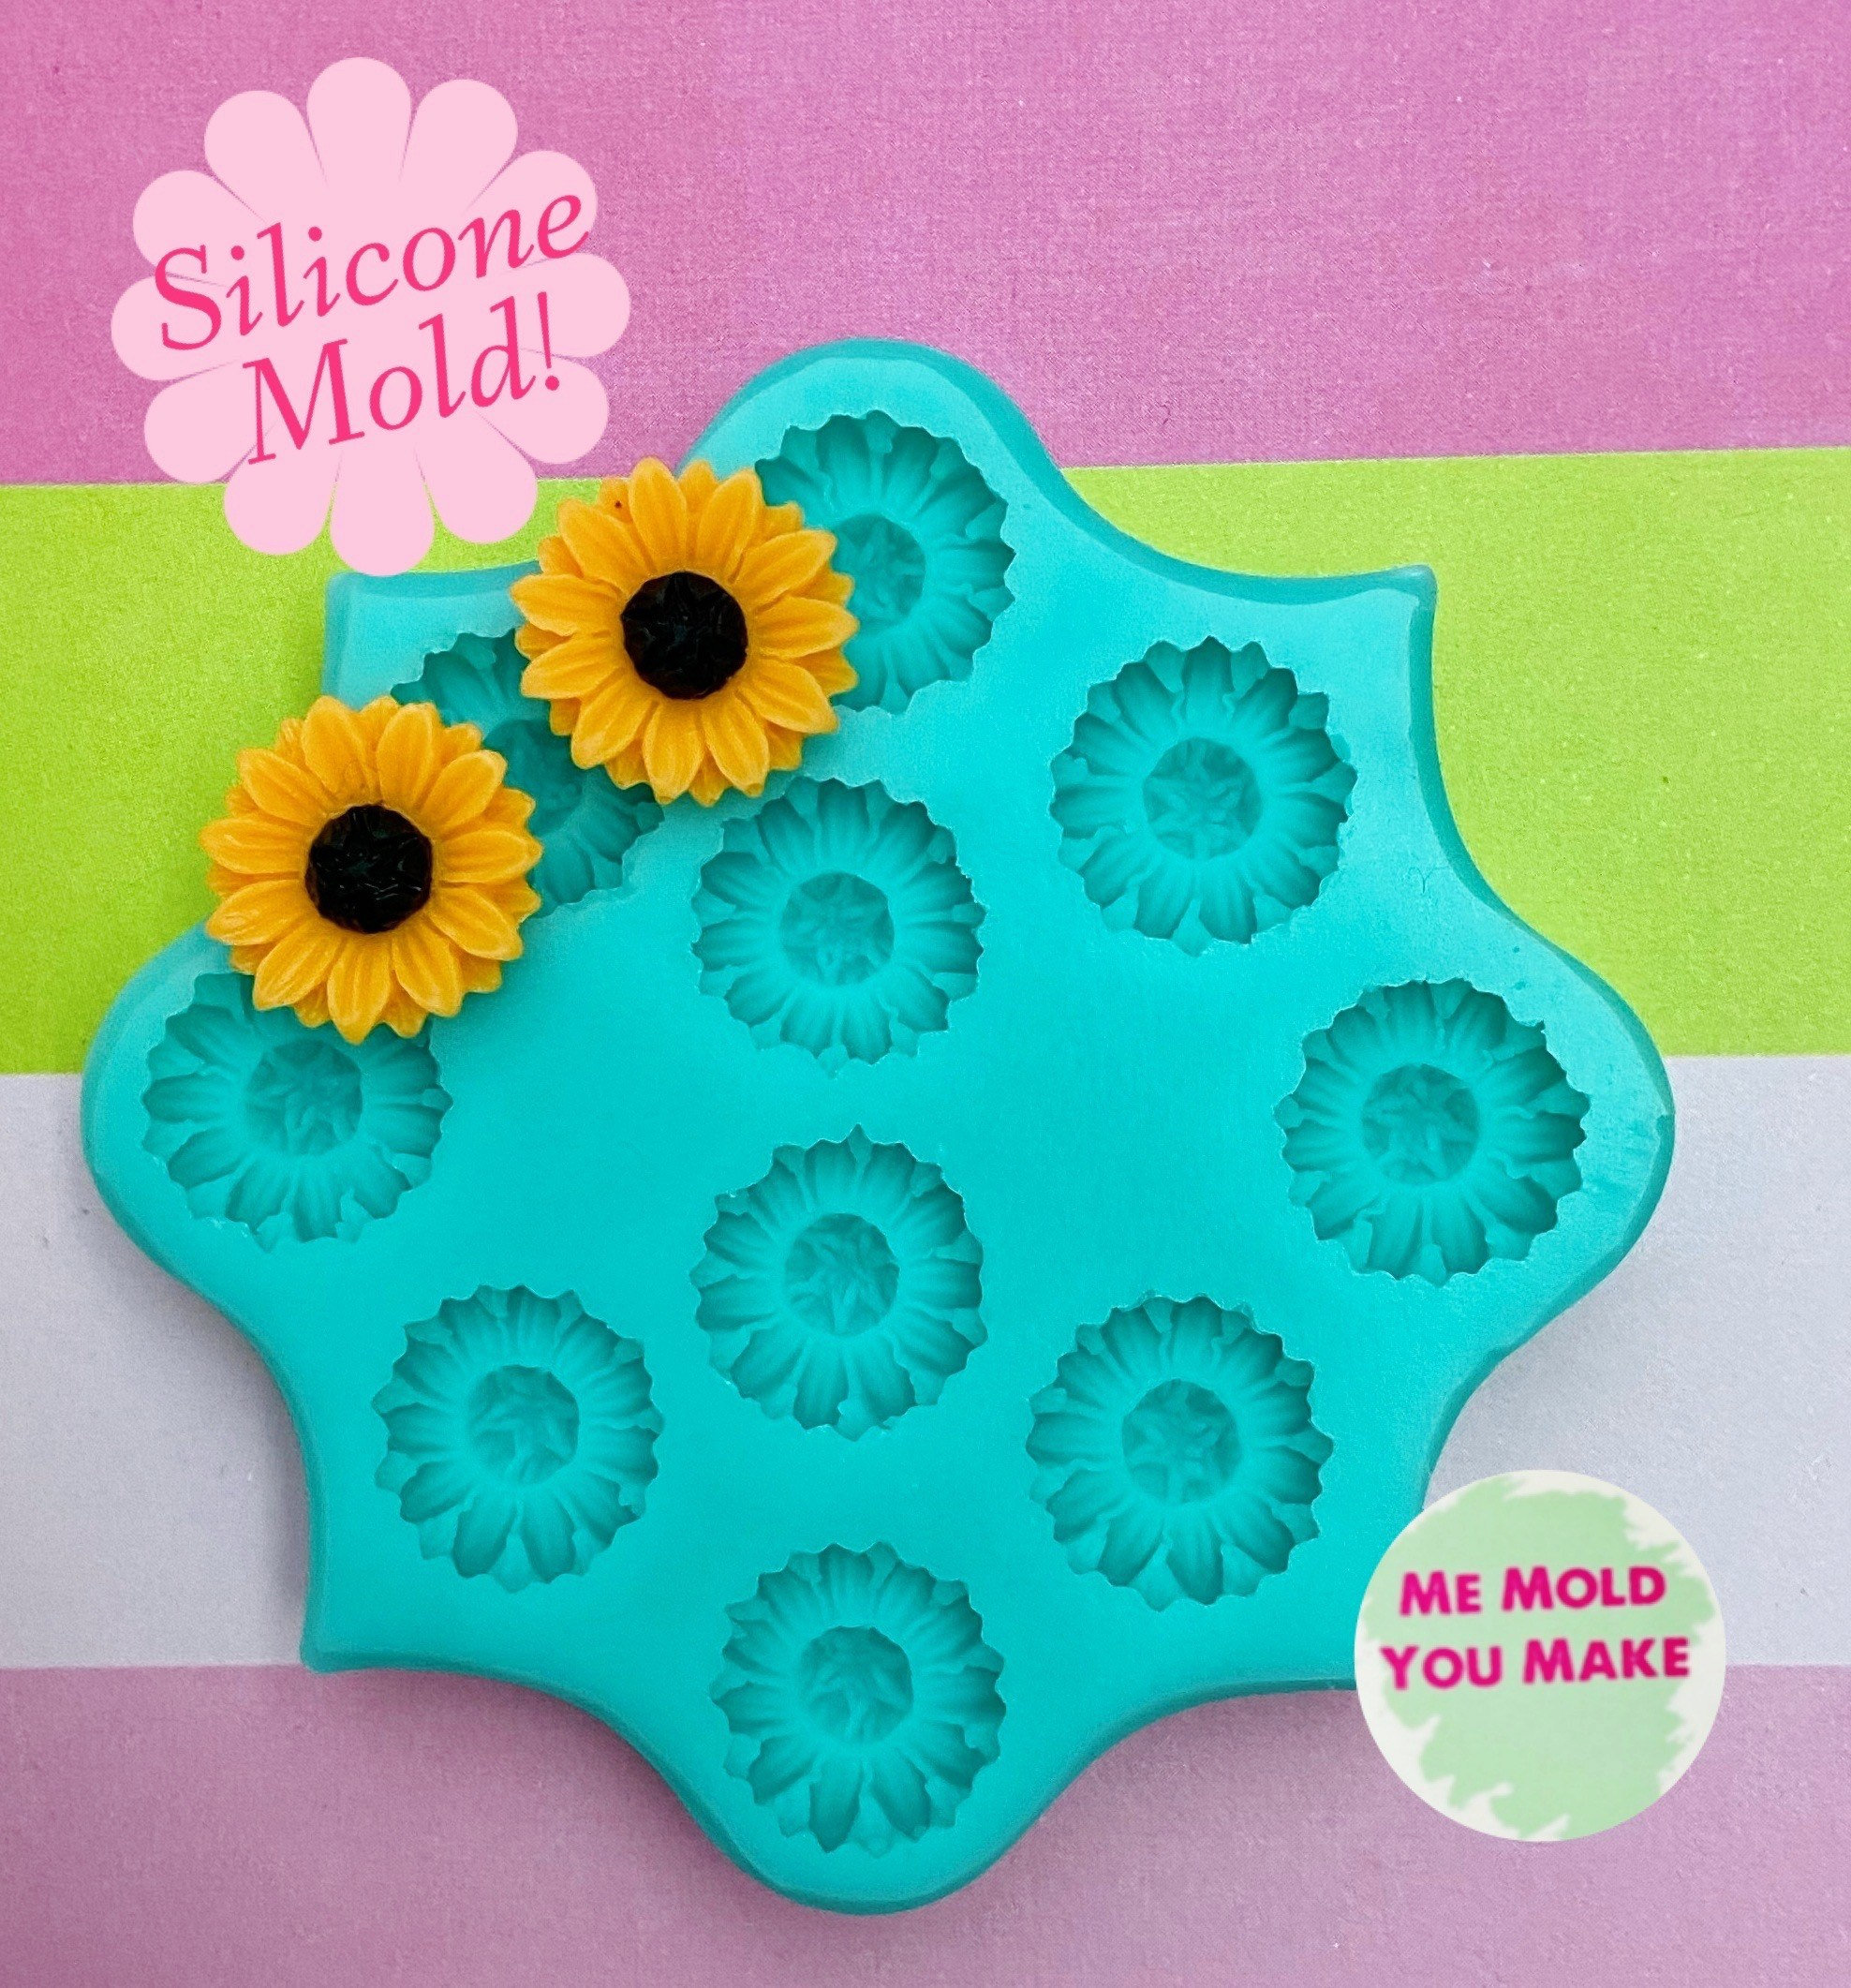 15MM Round Bead Resuable Silicone Mold